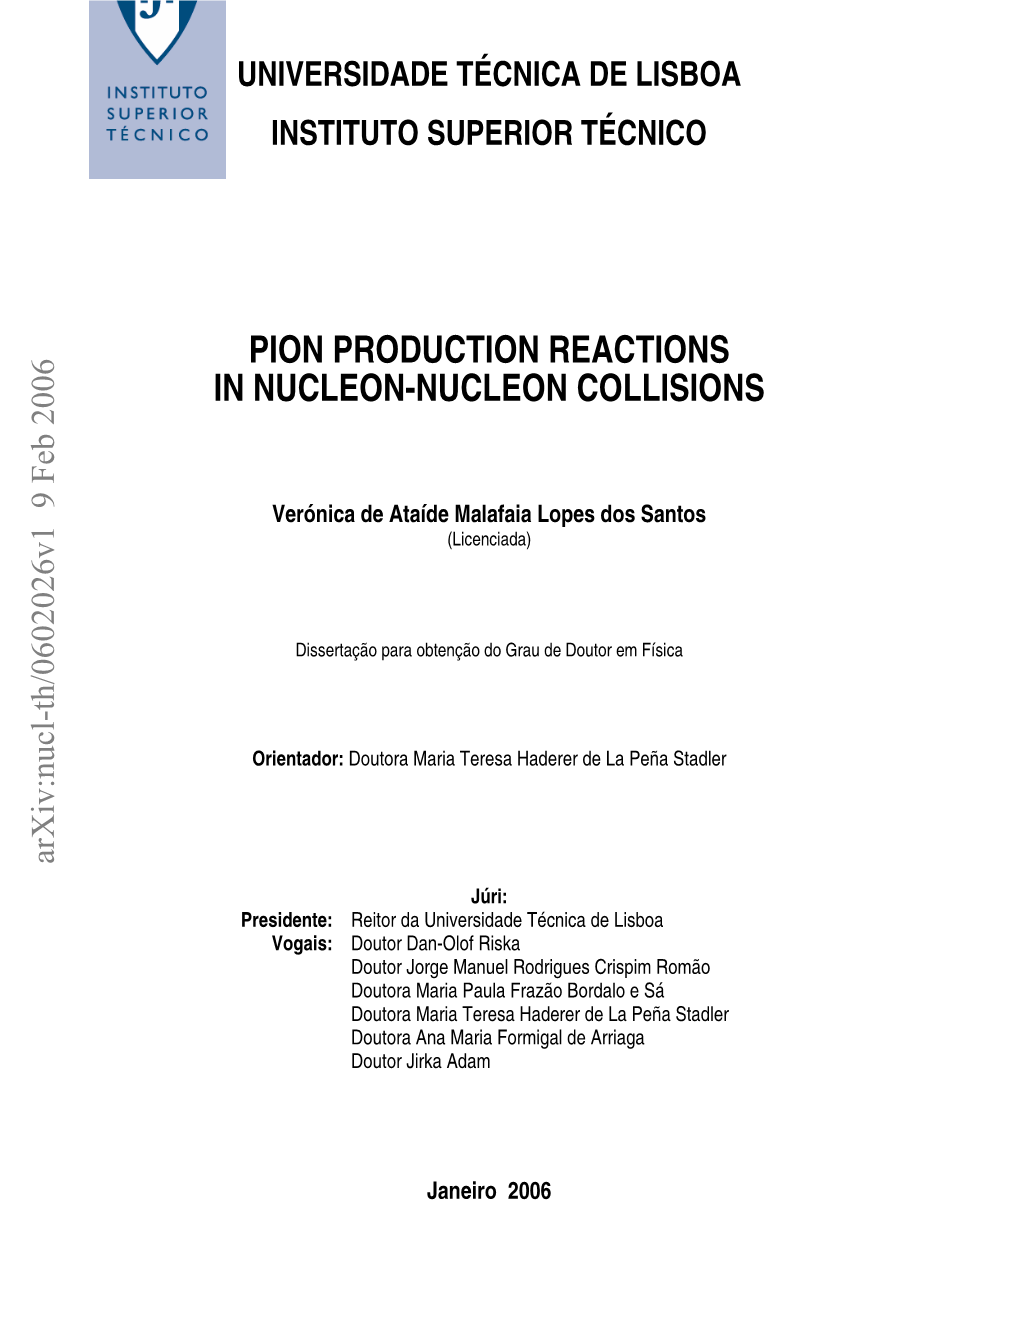 Pion Production Reactions in Nucleon-Nucleon Collisions